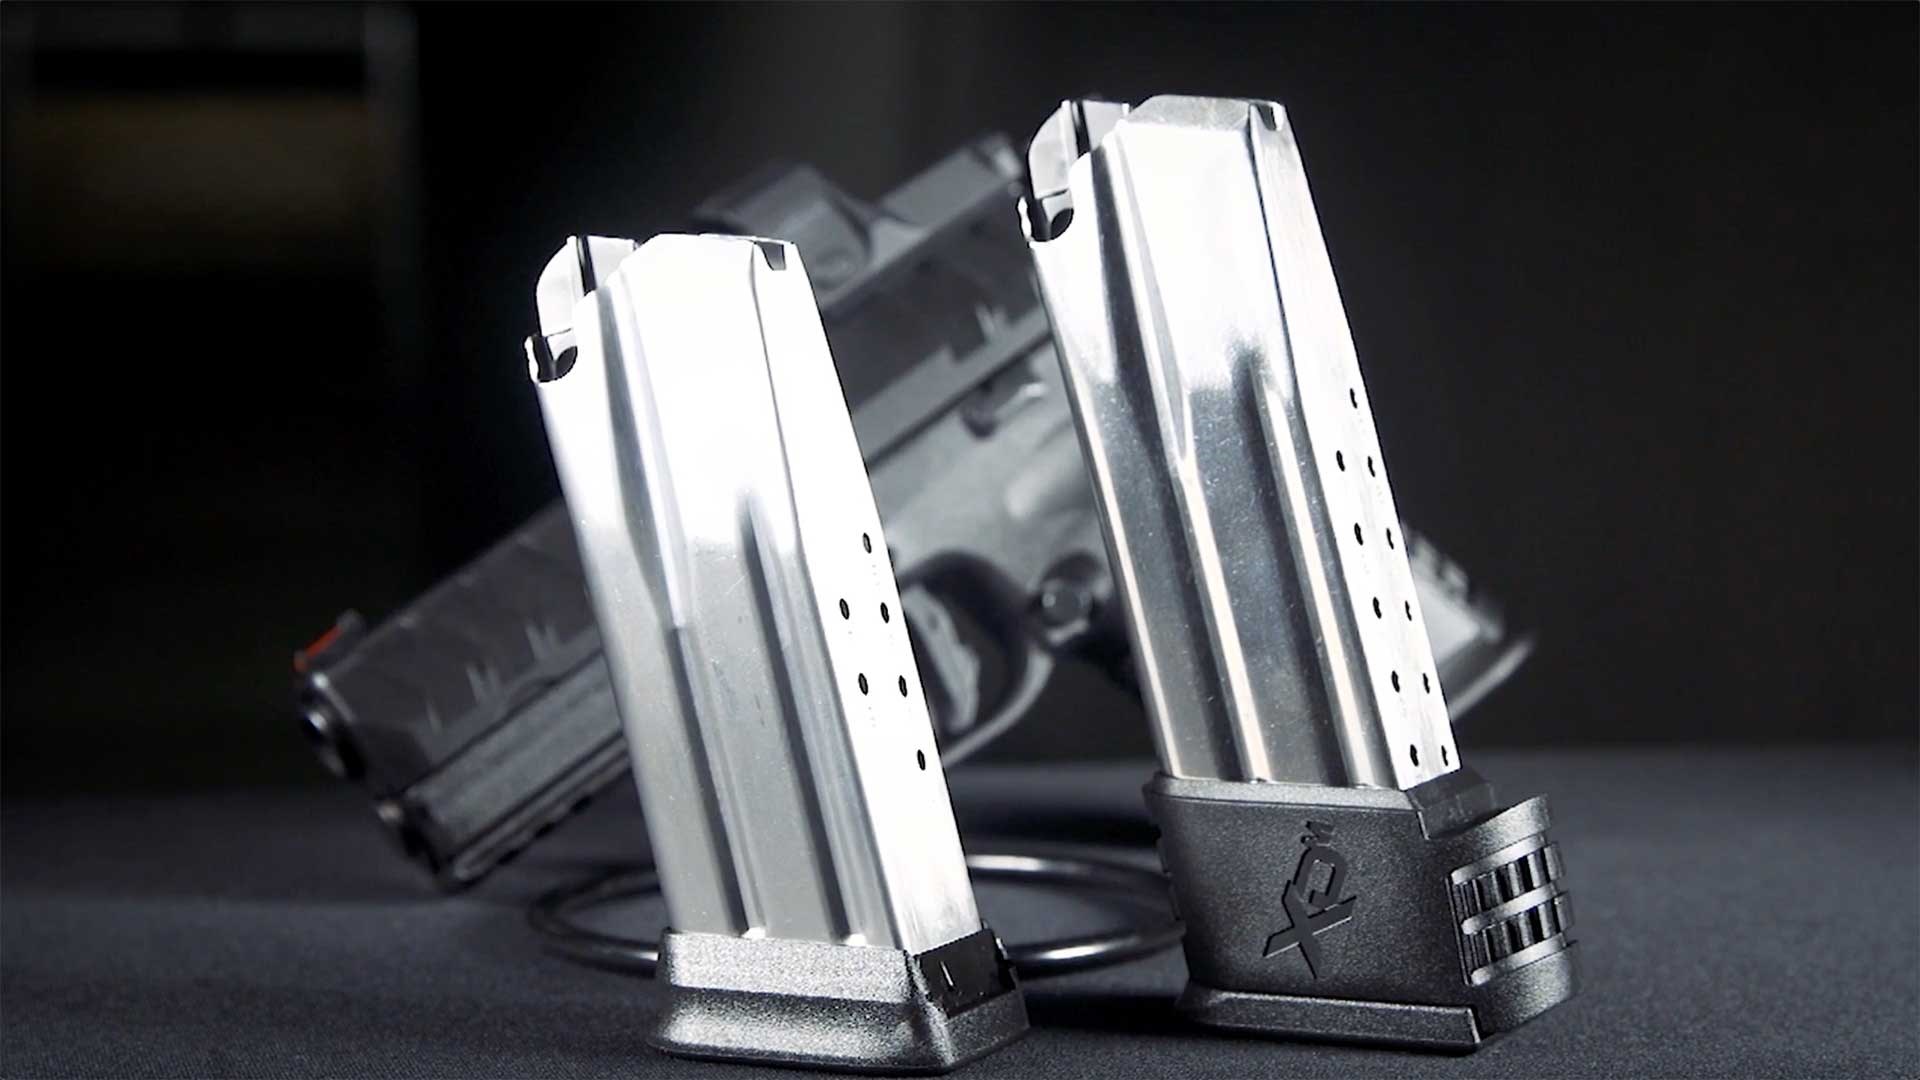 Standard flush fit magazine next to an extended 15-round magazine for the Springfield Armory XD-M Elite Compact.